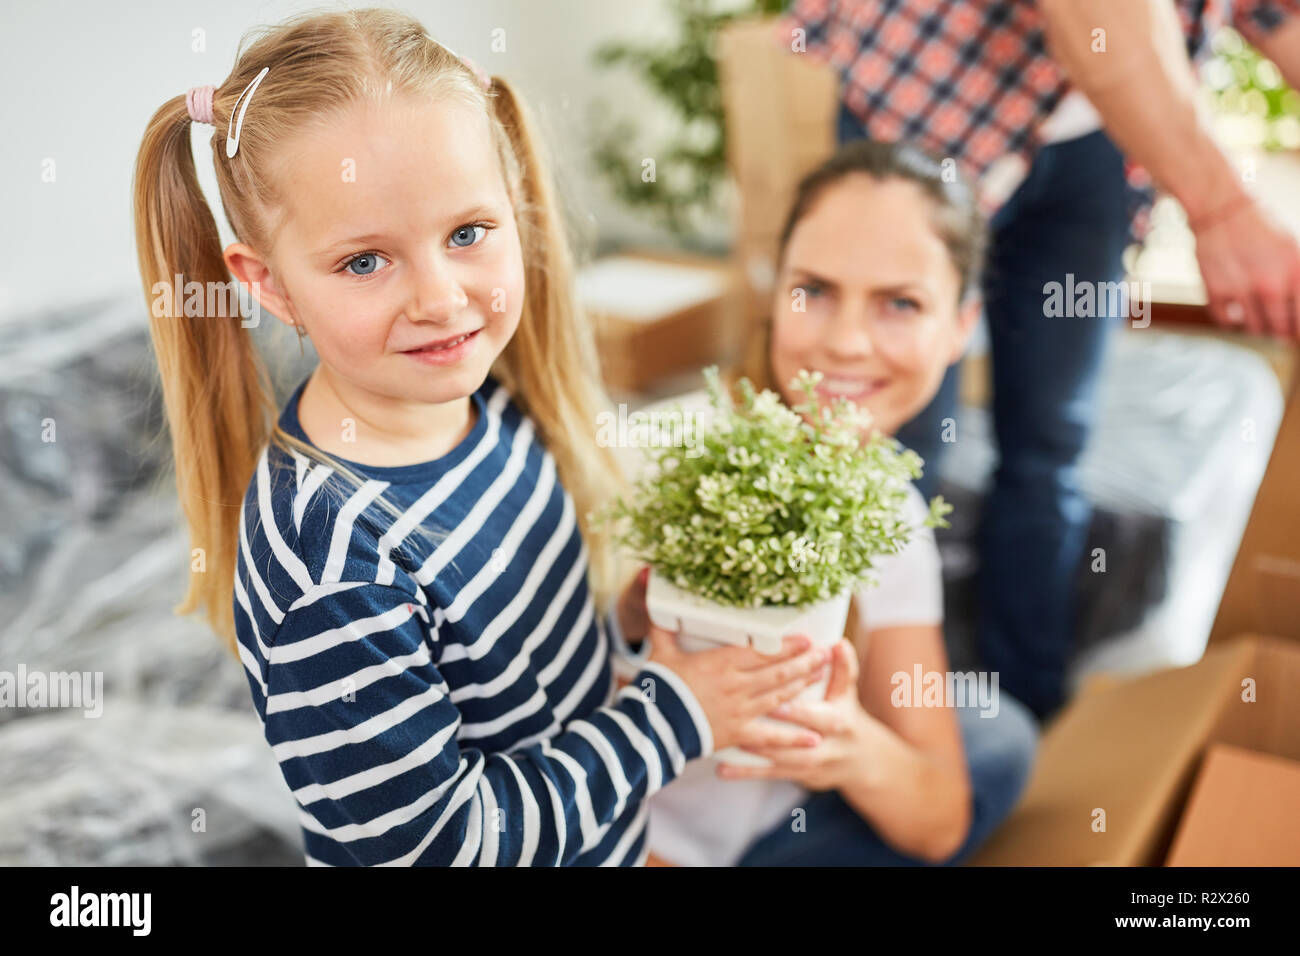 Little girl helps parents to move while carrying plants Stock Photo